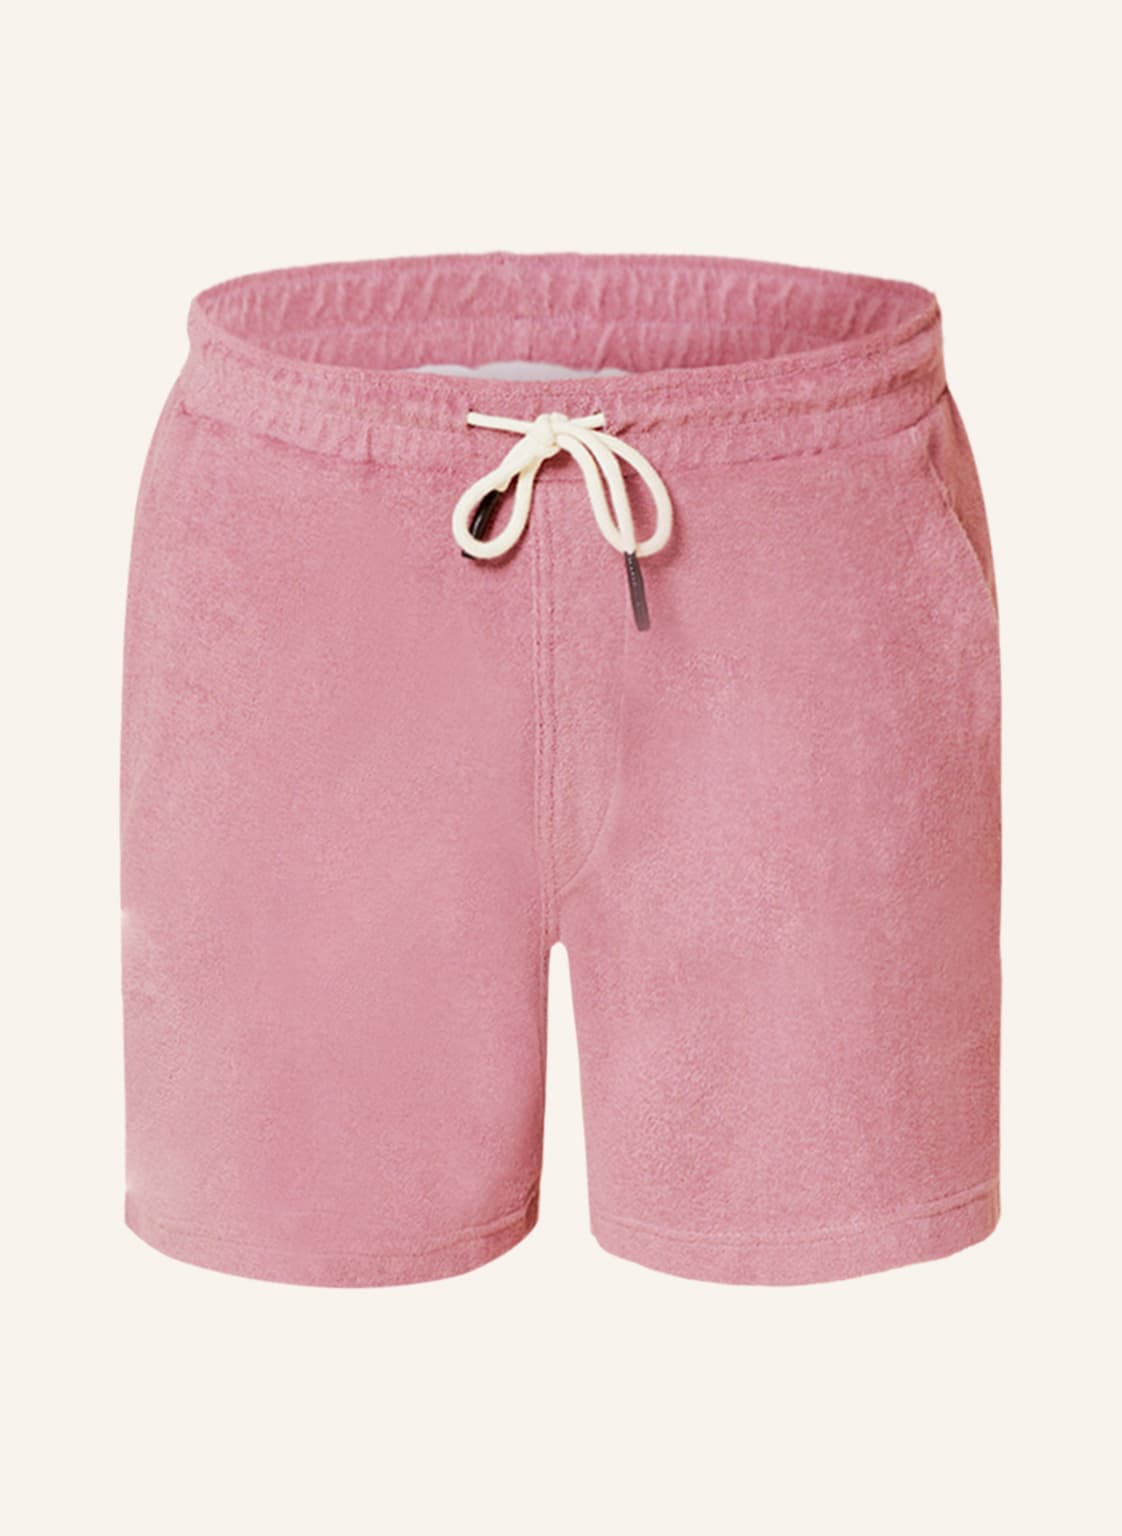 Image of Oas Badeshorts Aus Frottee rosa